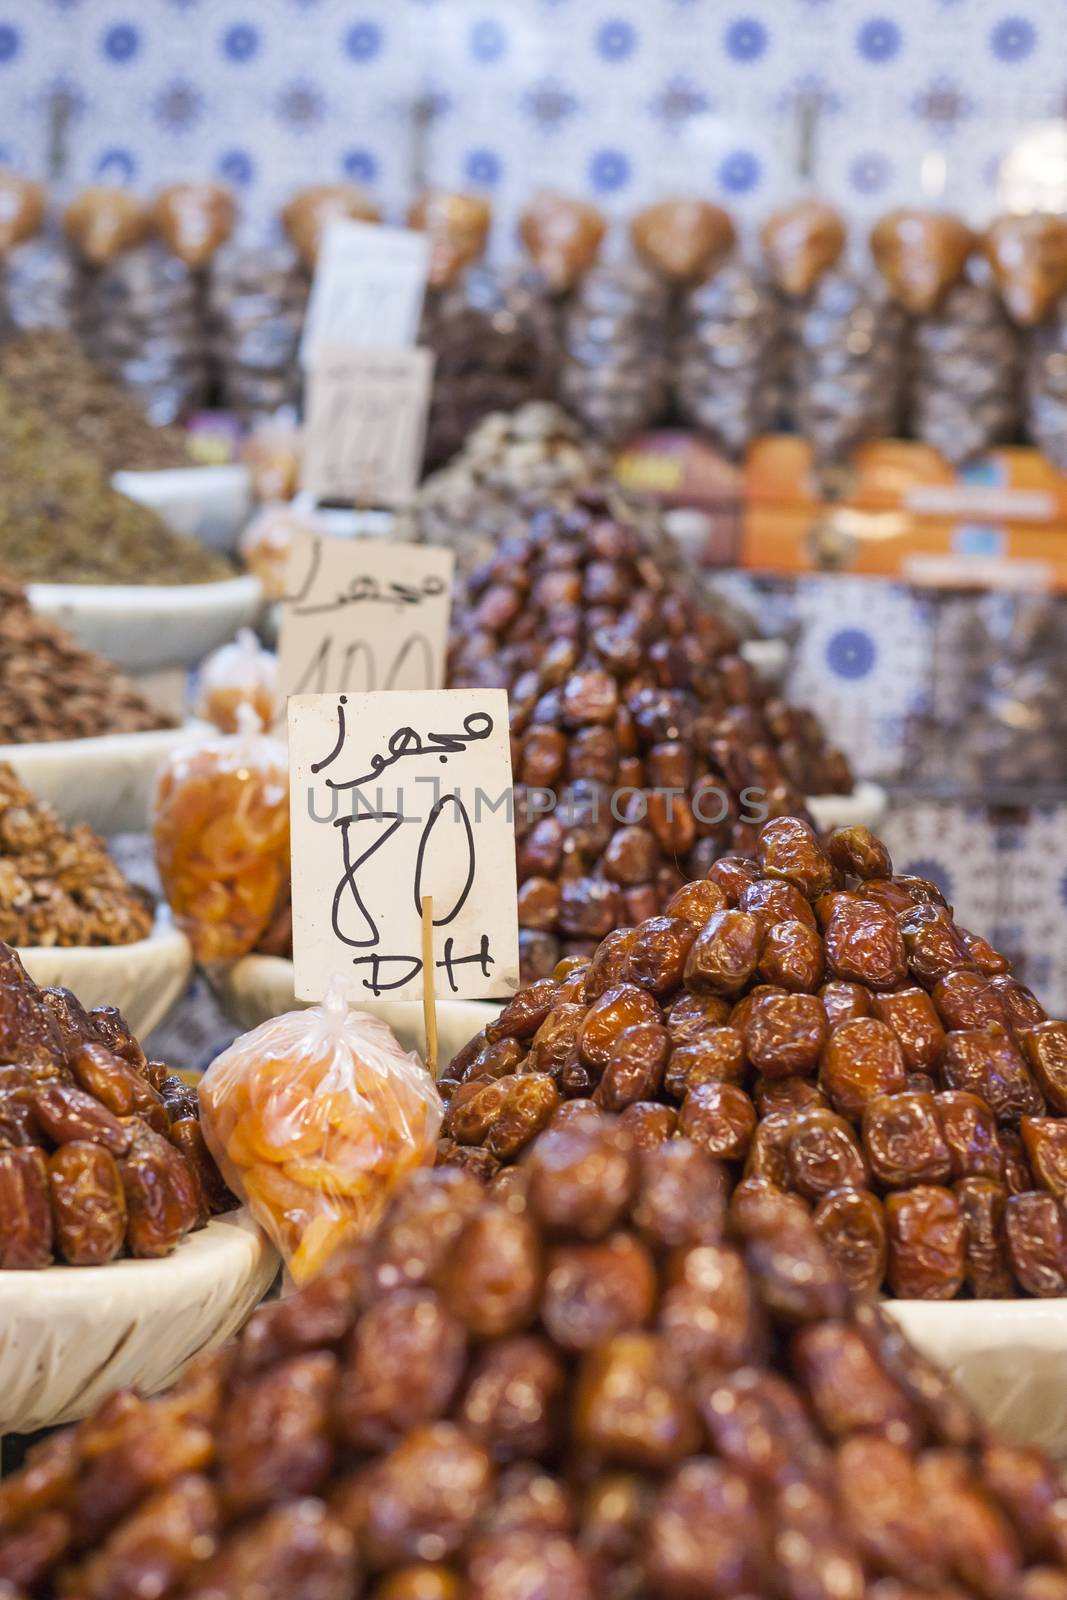 Nuts and dried fruit for sale in the souk of Fes, Morocco by mariusz_prusaczyk